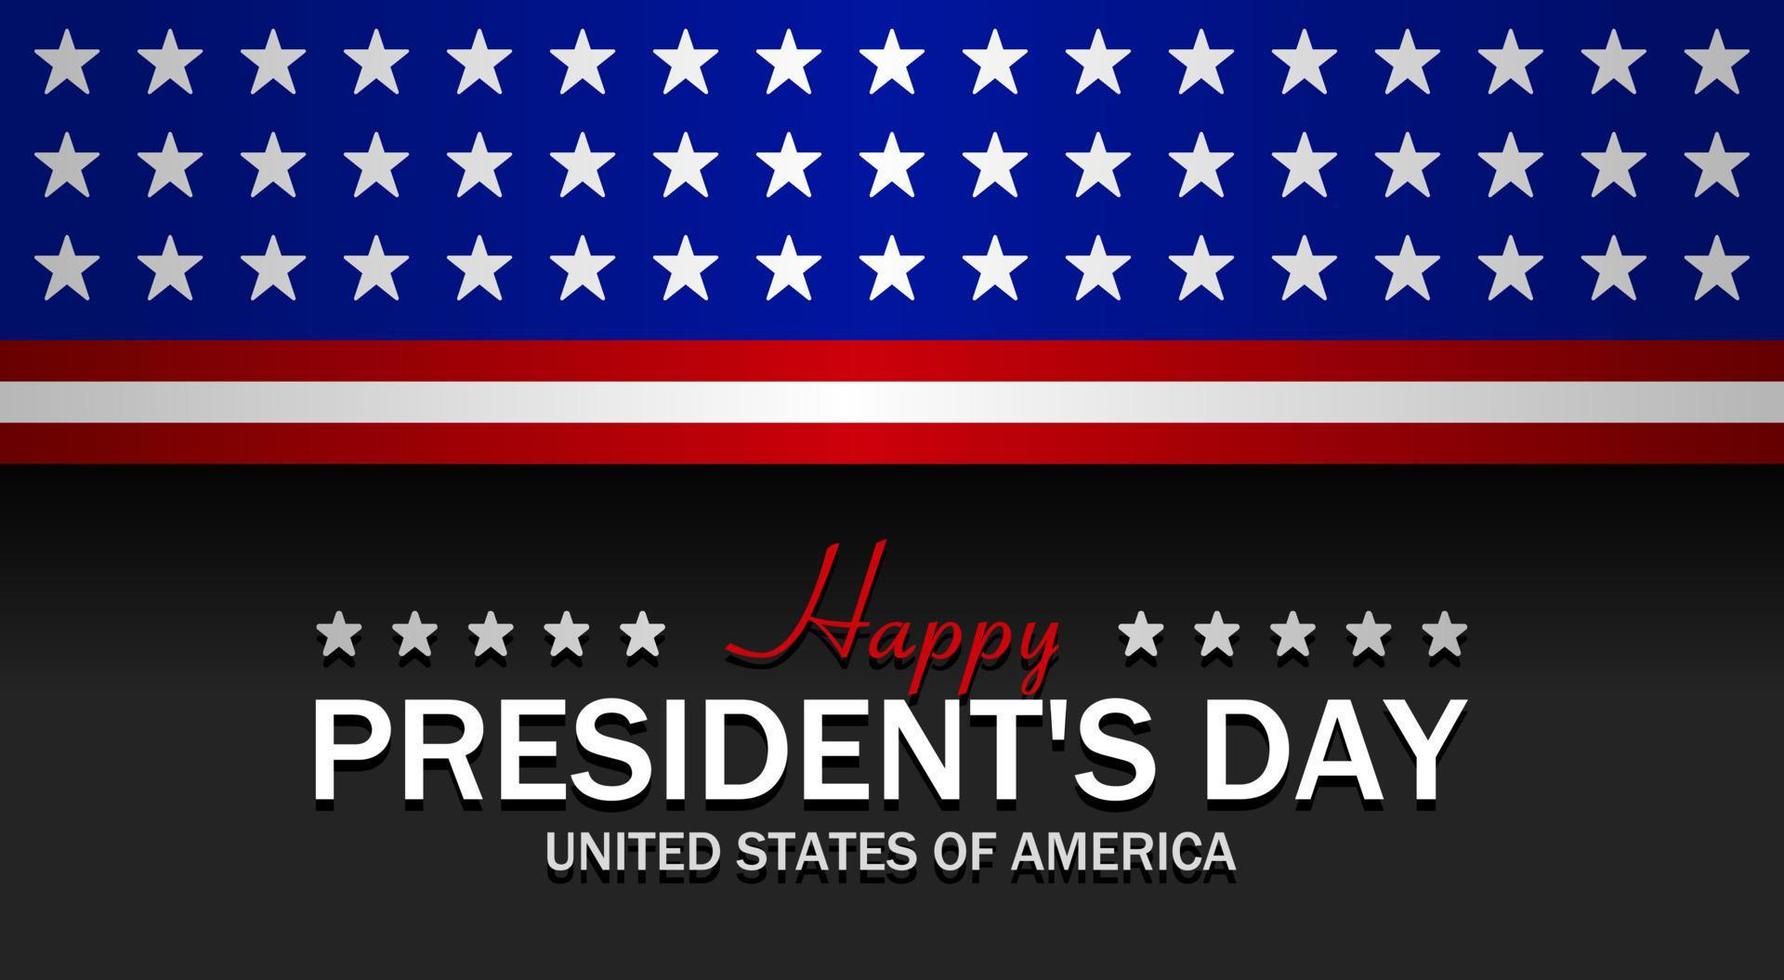 Happy President's day USA lettering template. Vector illustration. Suitable for Poster, Banners, background and greeting card.